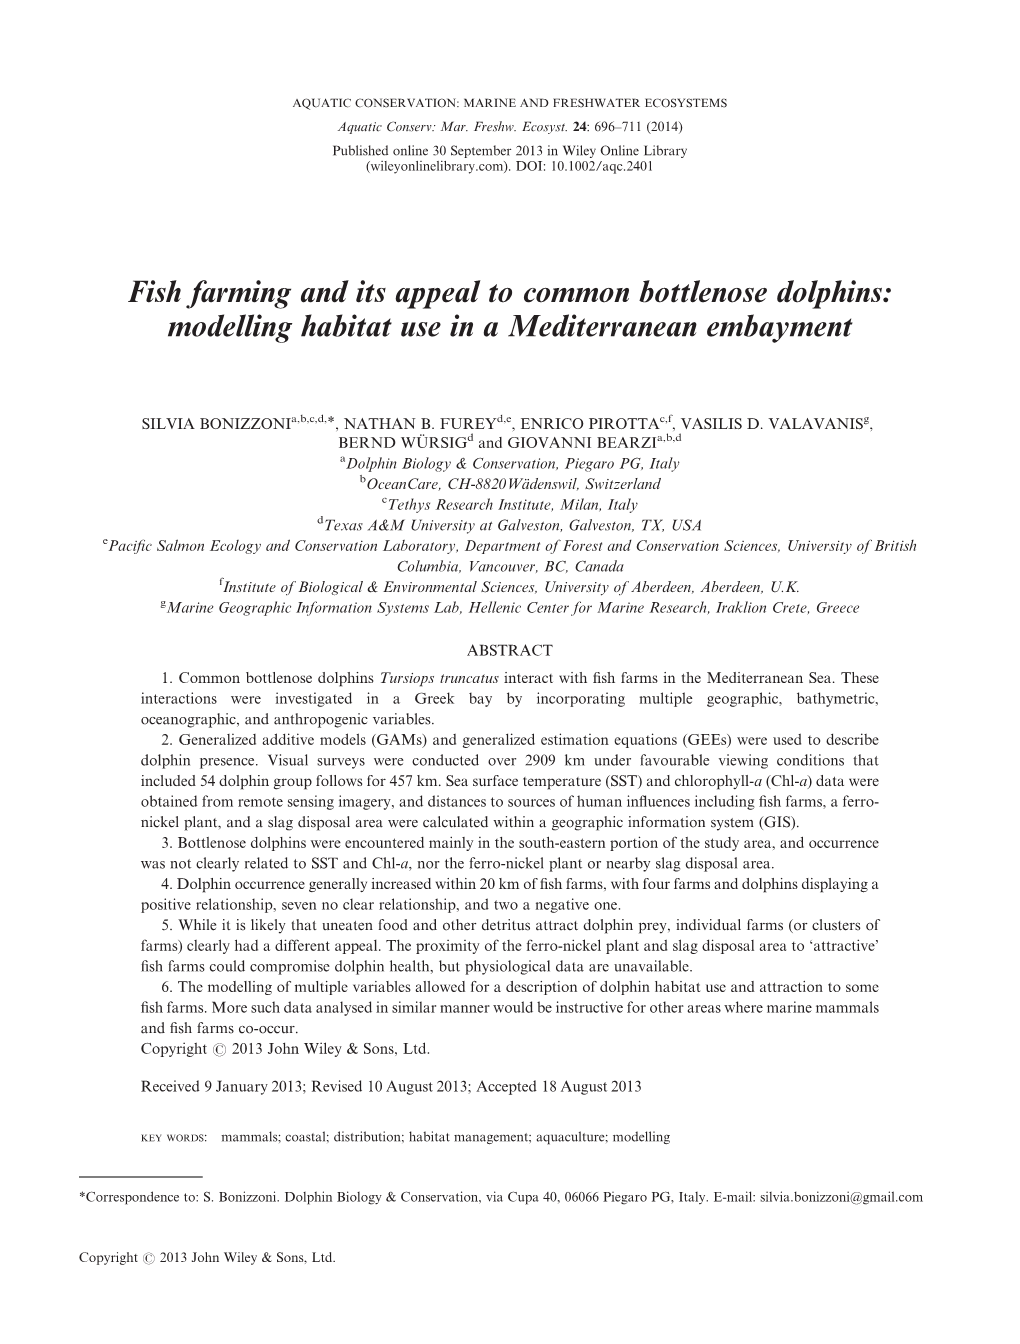 Fish Farming and Its Appeal to Common Bottlenose Dolphins: Modelling Habitat Use in a Mediterranean Embayment